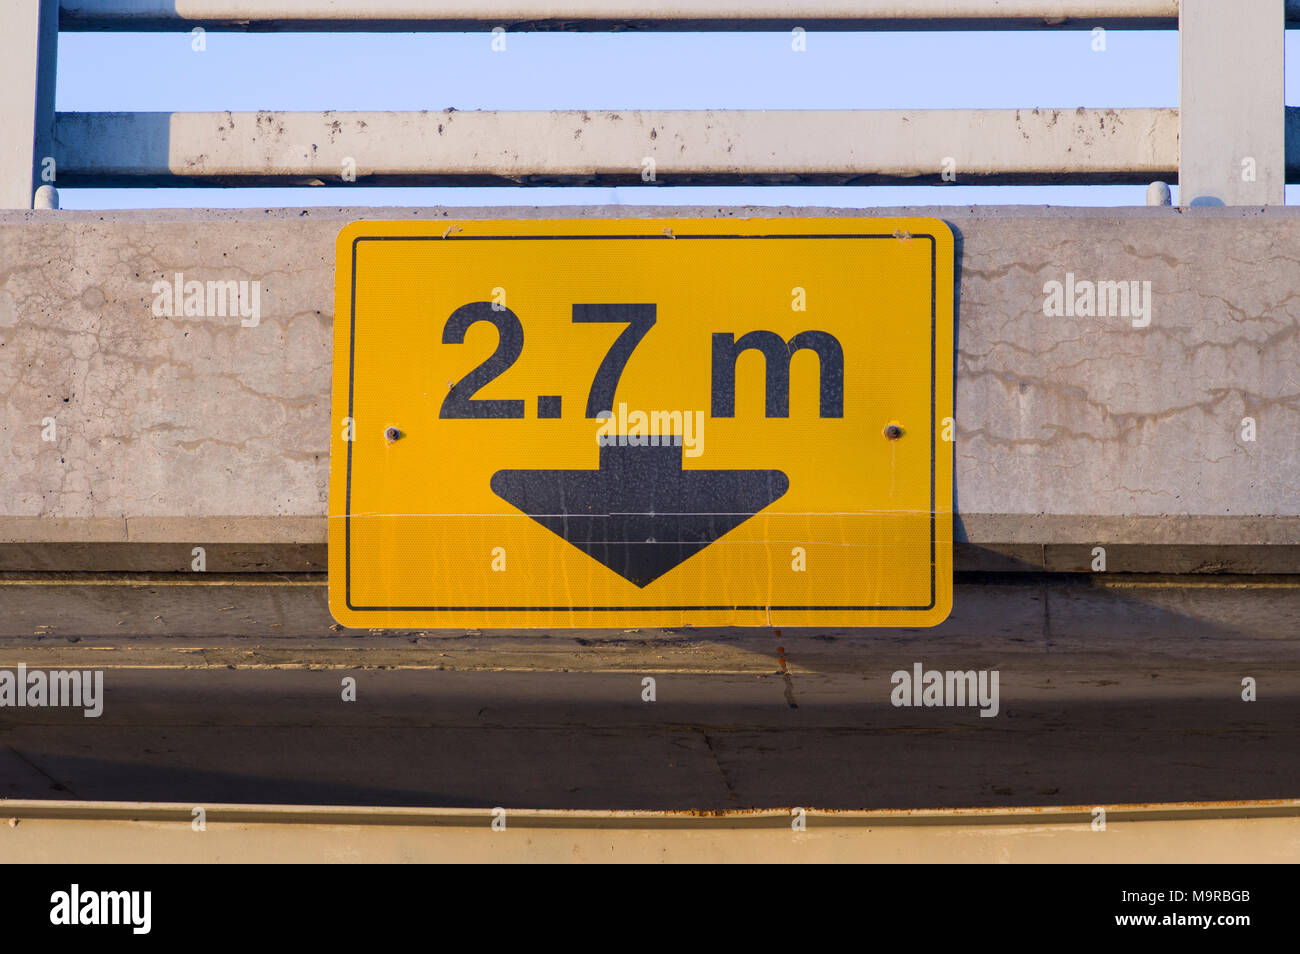 2.7 meter height restriction on overpass Stock Photo